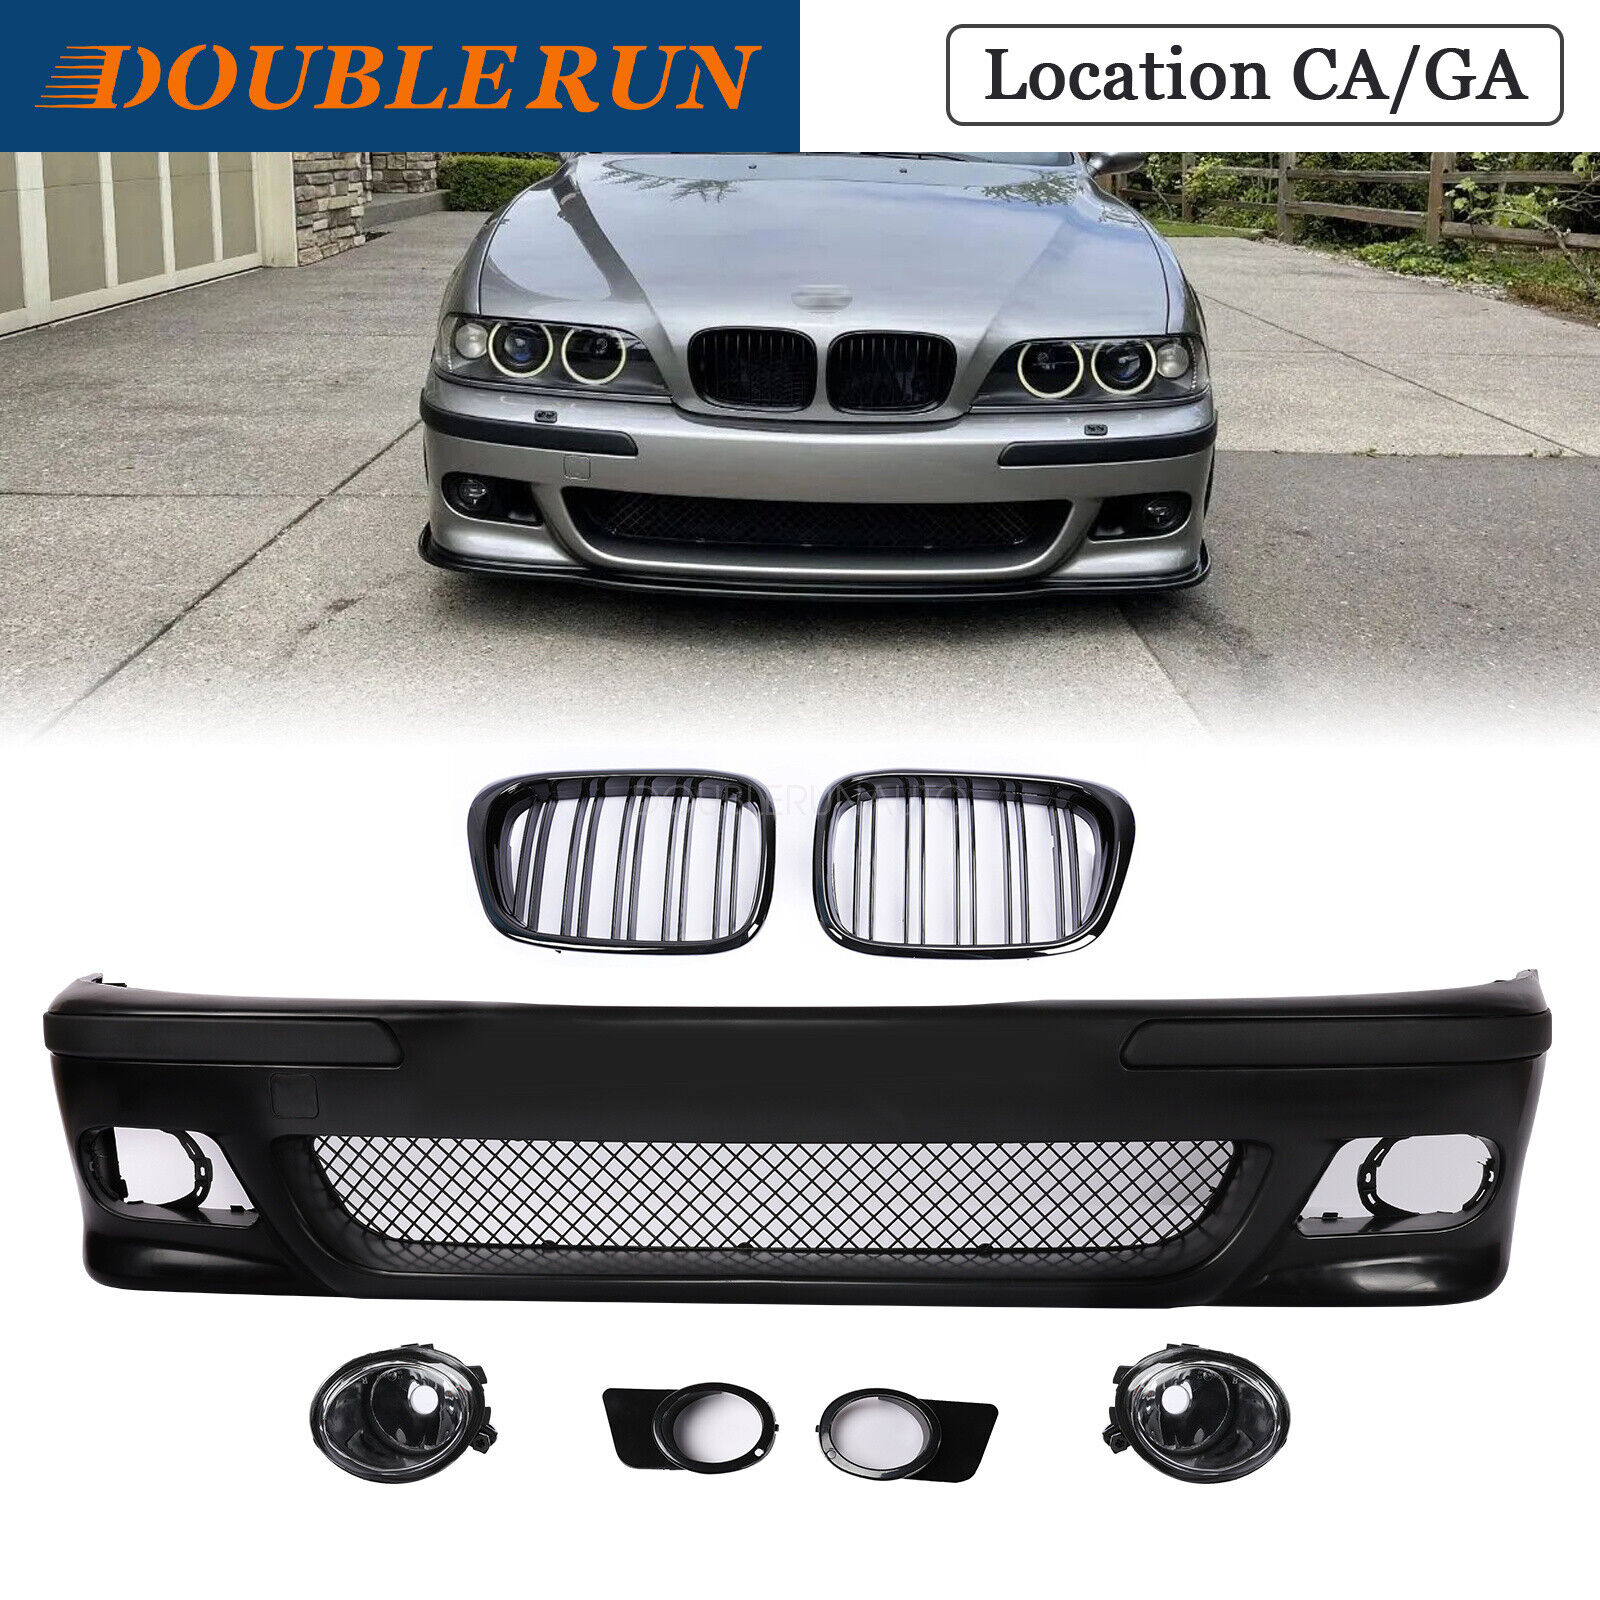 front bumper w/fog light w/grille  For 1997-2003 BMW E39 5 SERIES M5 look